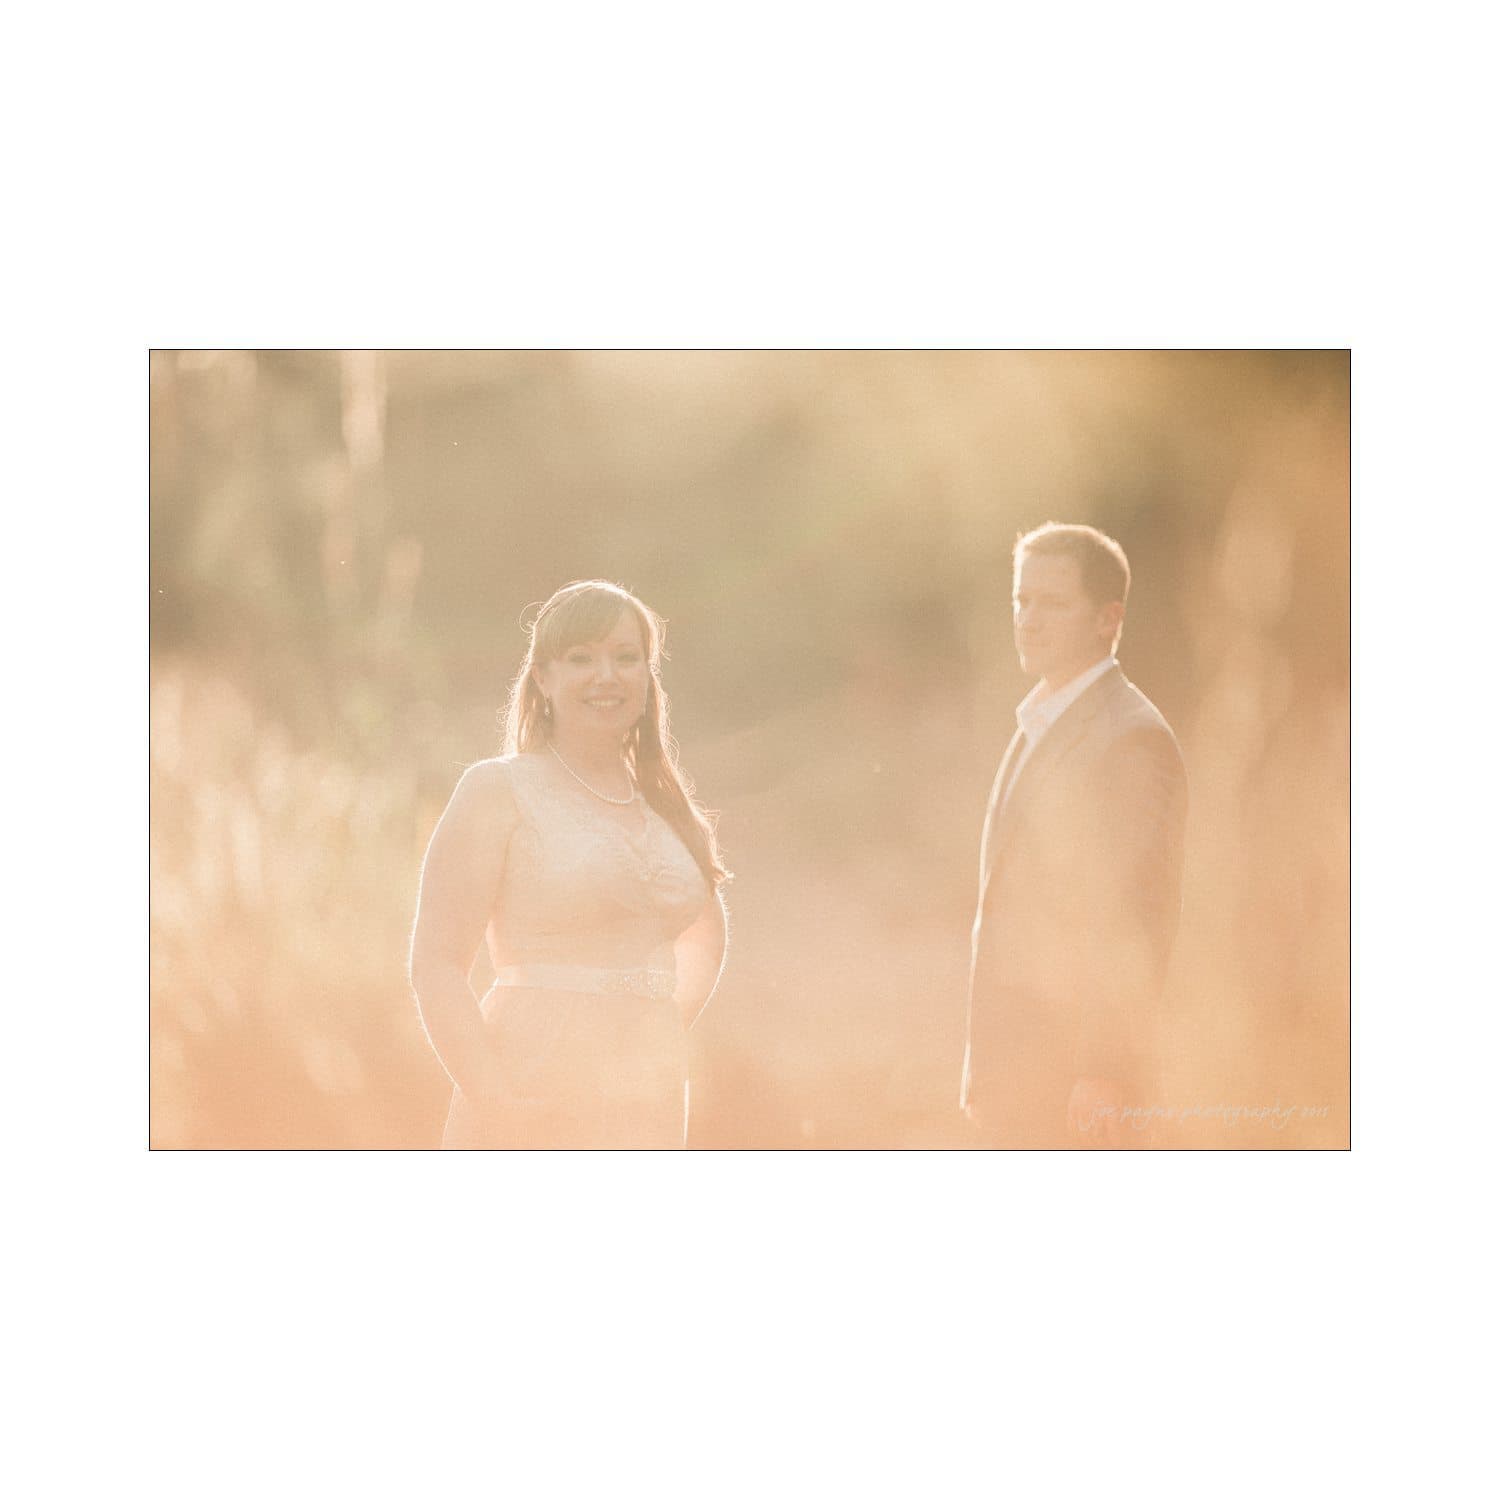 raleigh wedding portrait session - michelle & clay